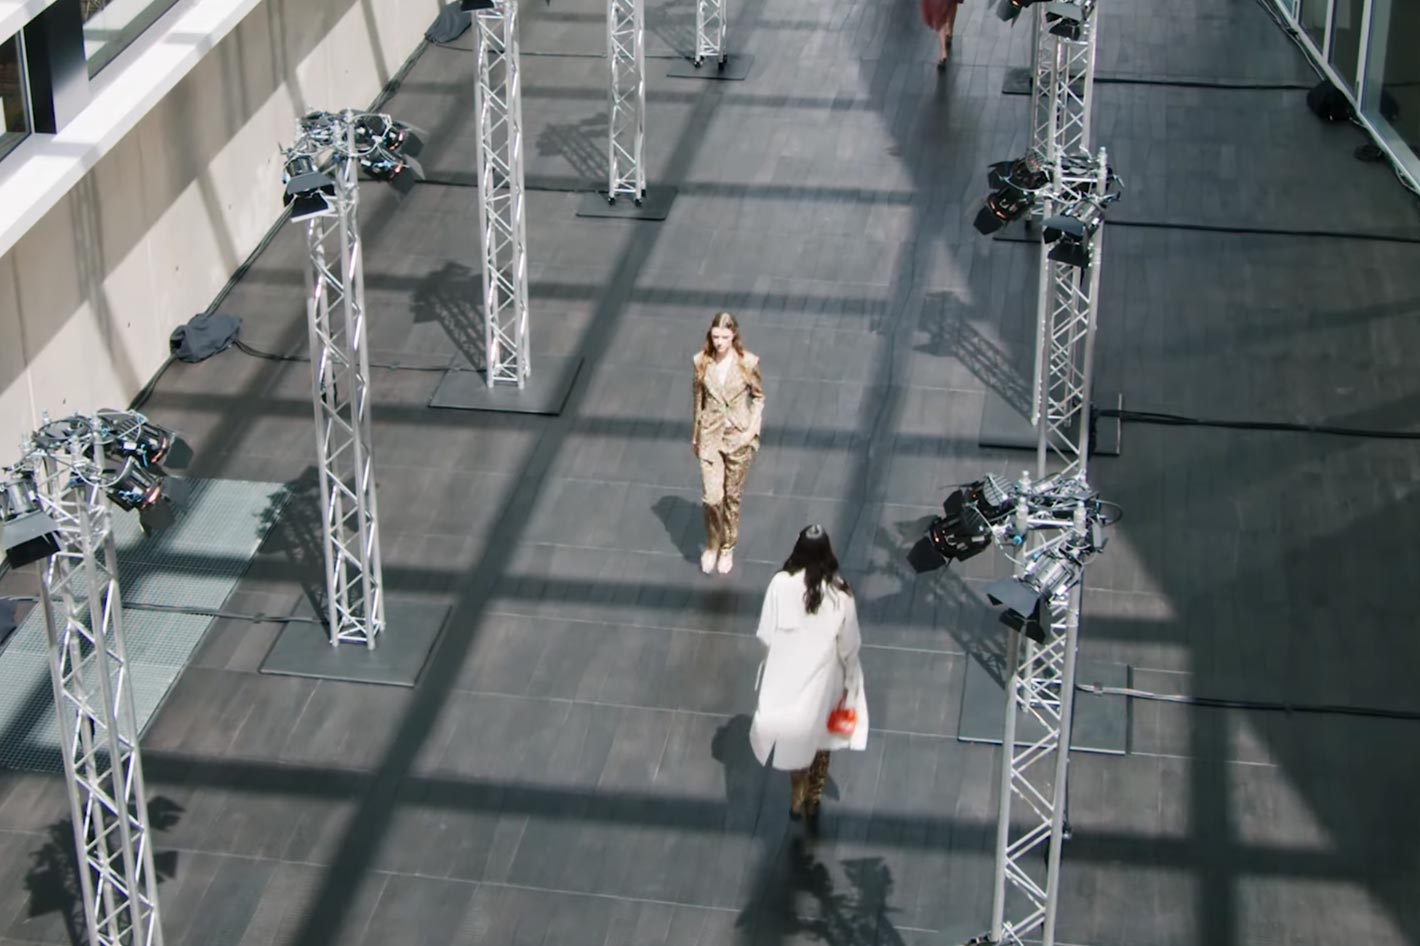 The sky is the limit: fashion shows go digital